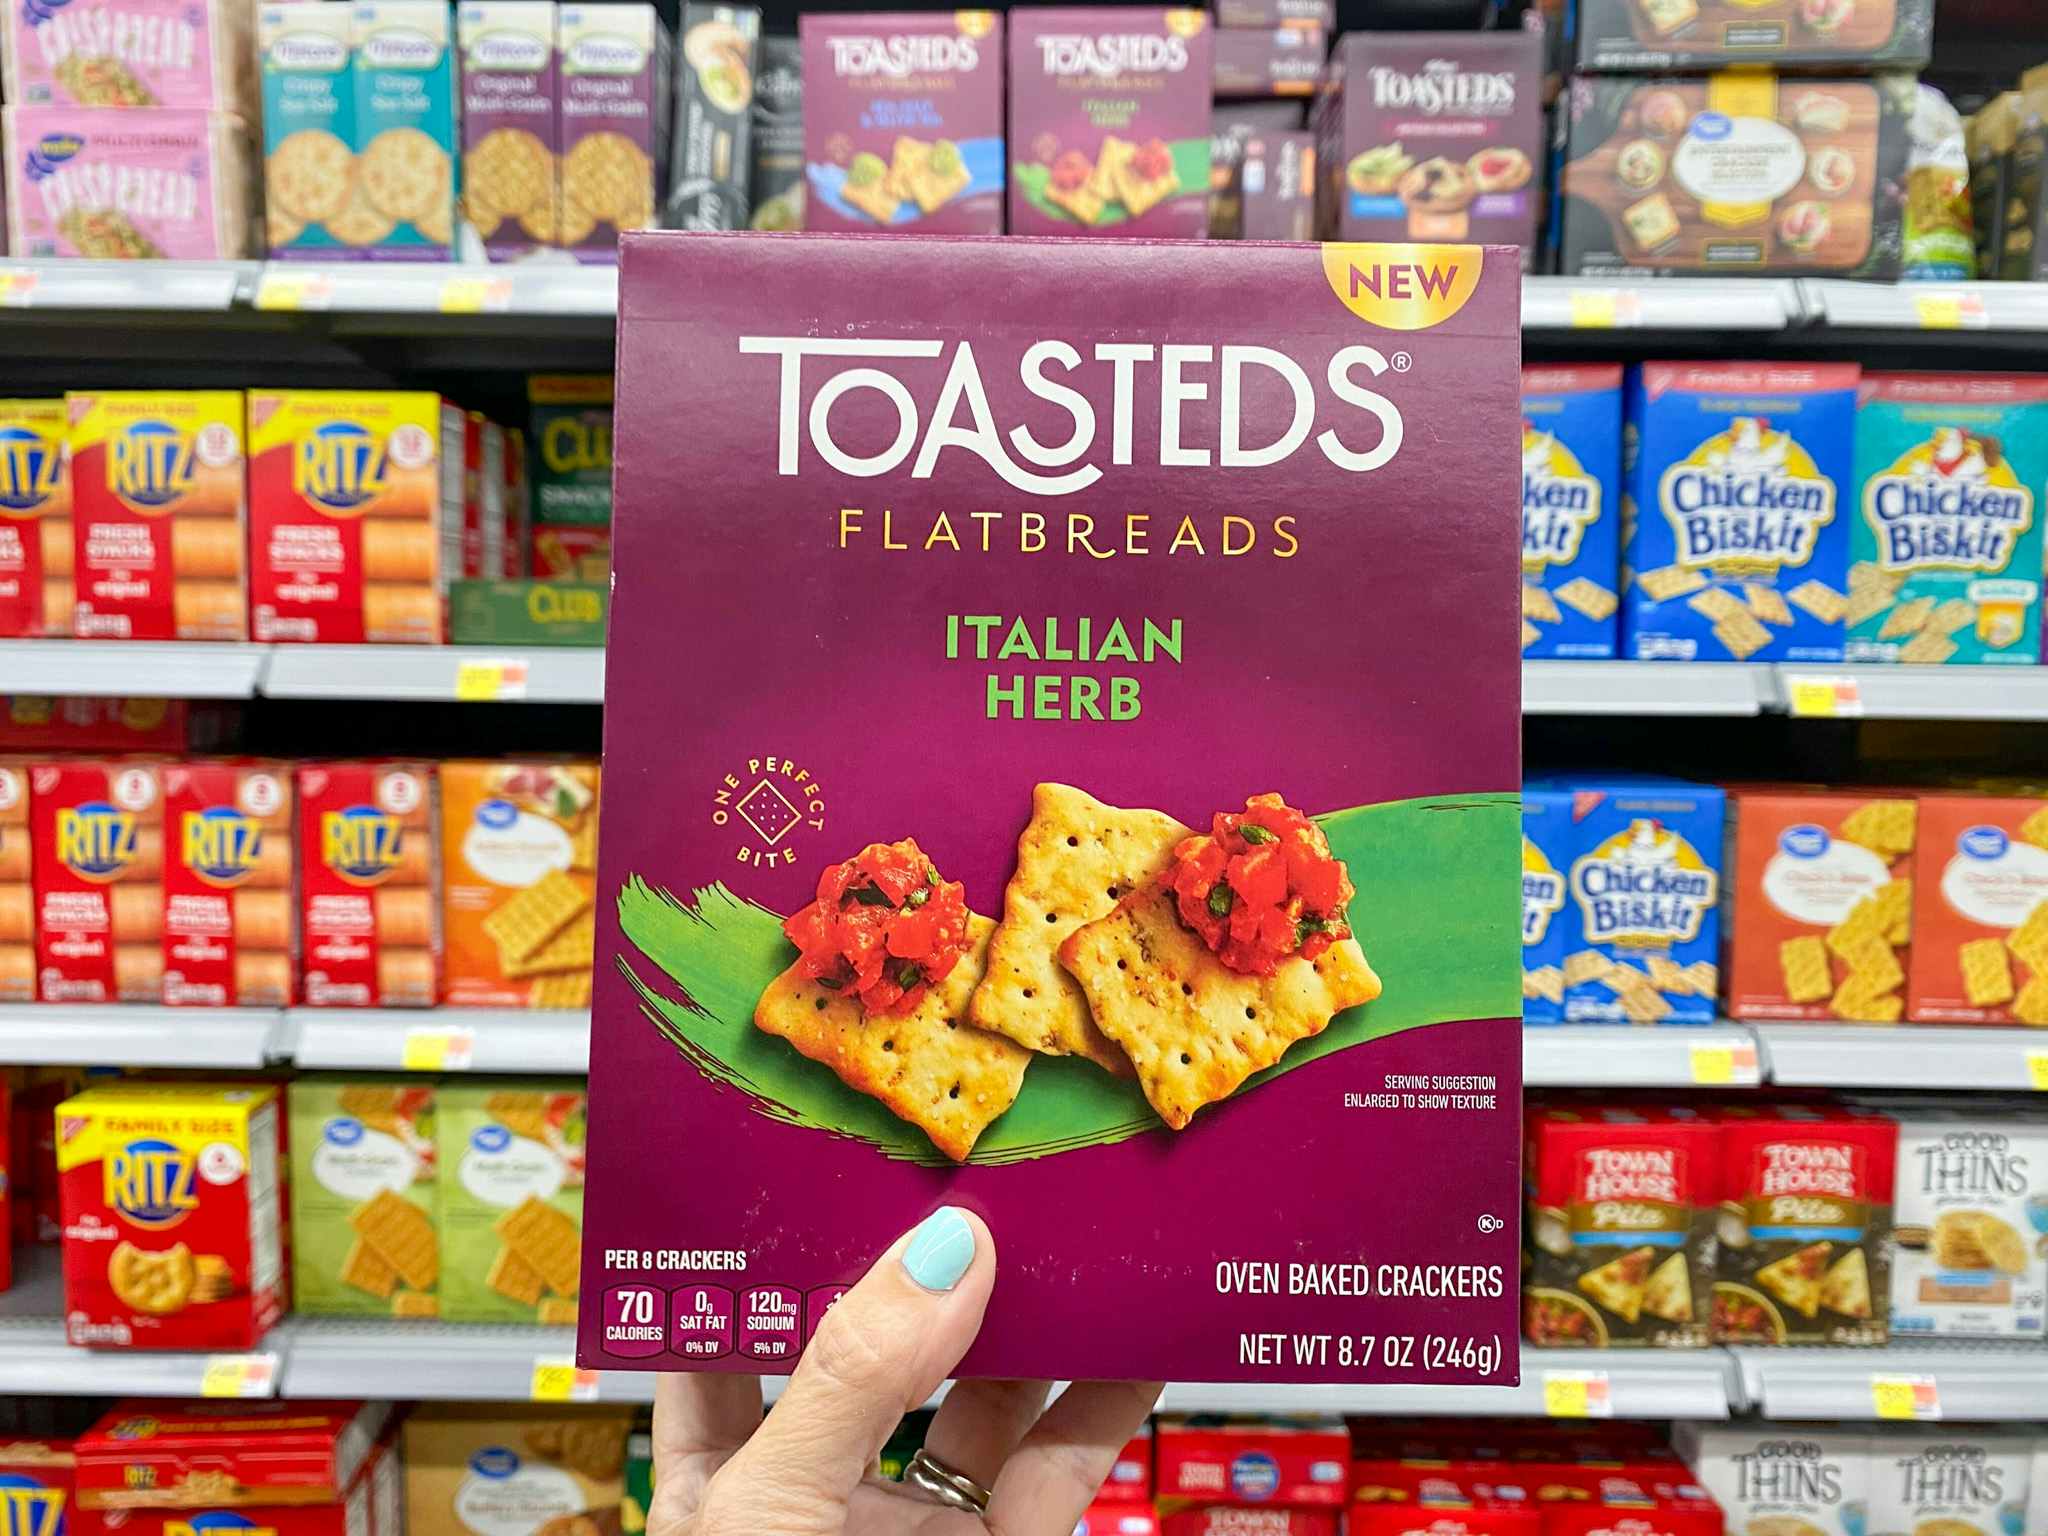 person holding a box of toasteds flatbreads crackers in an aisle